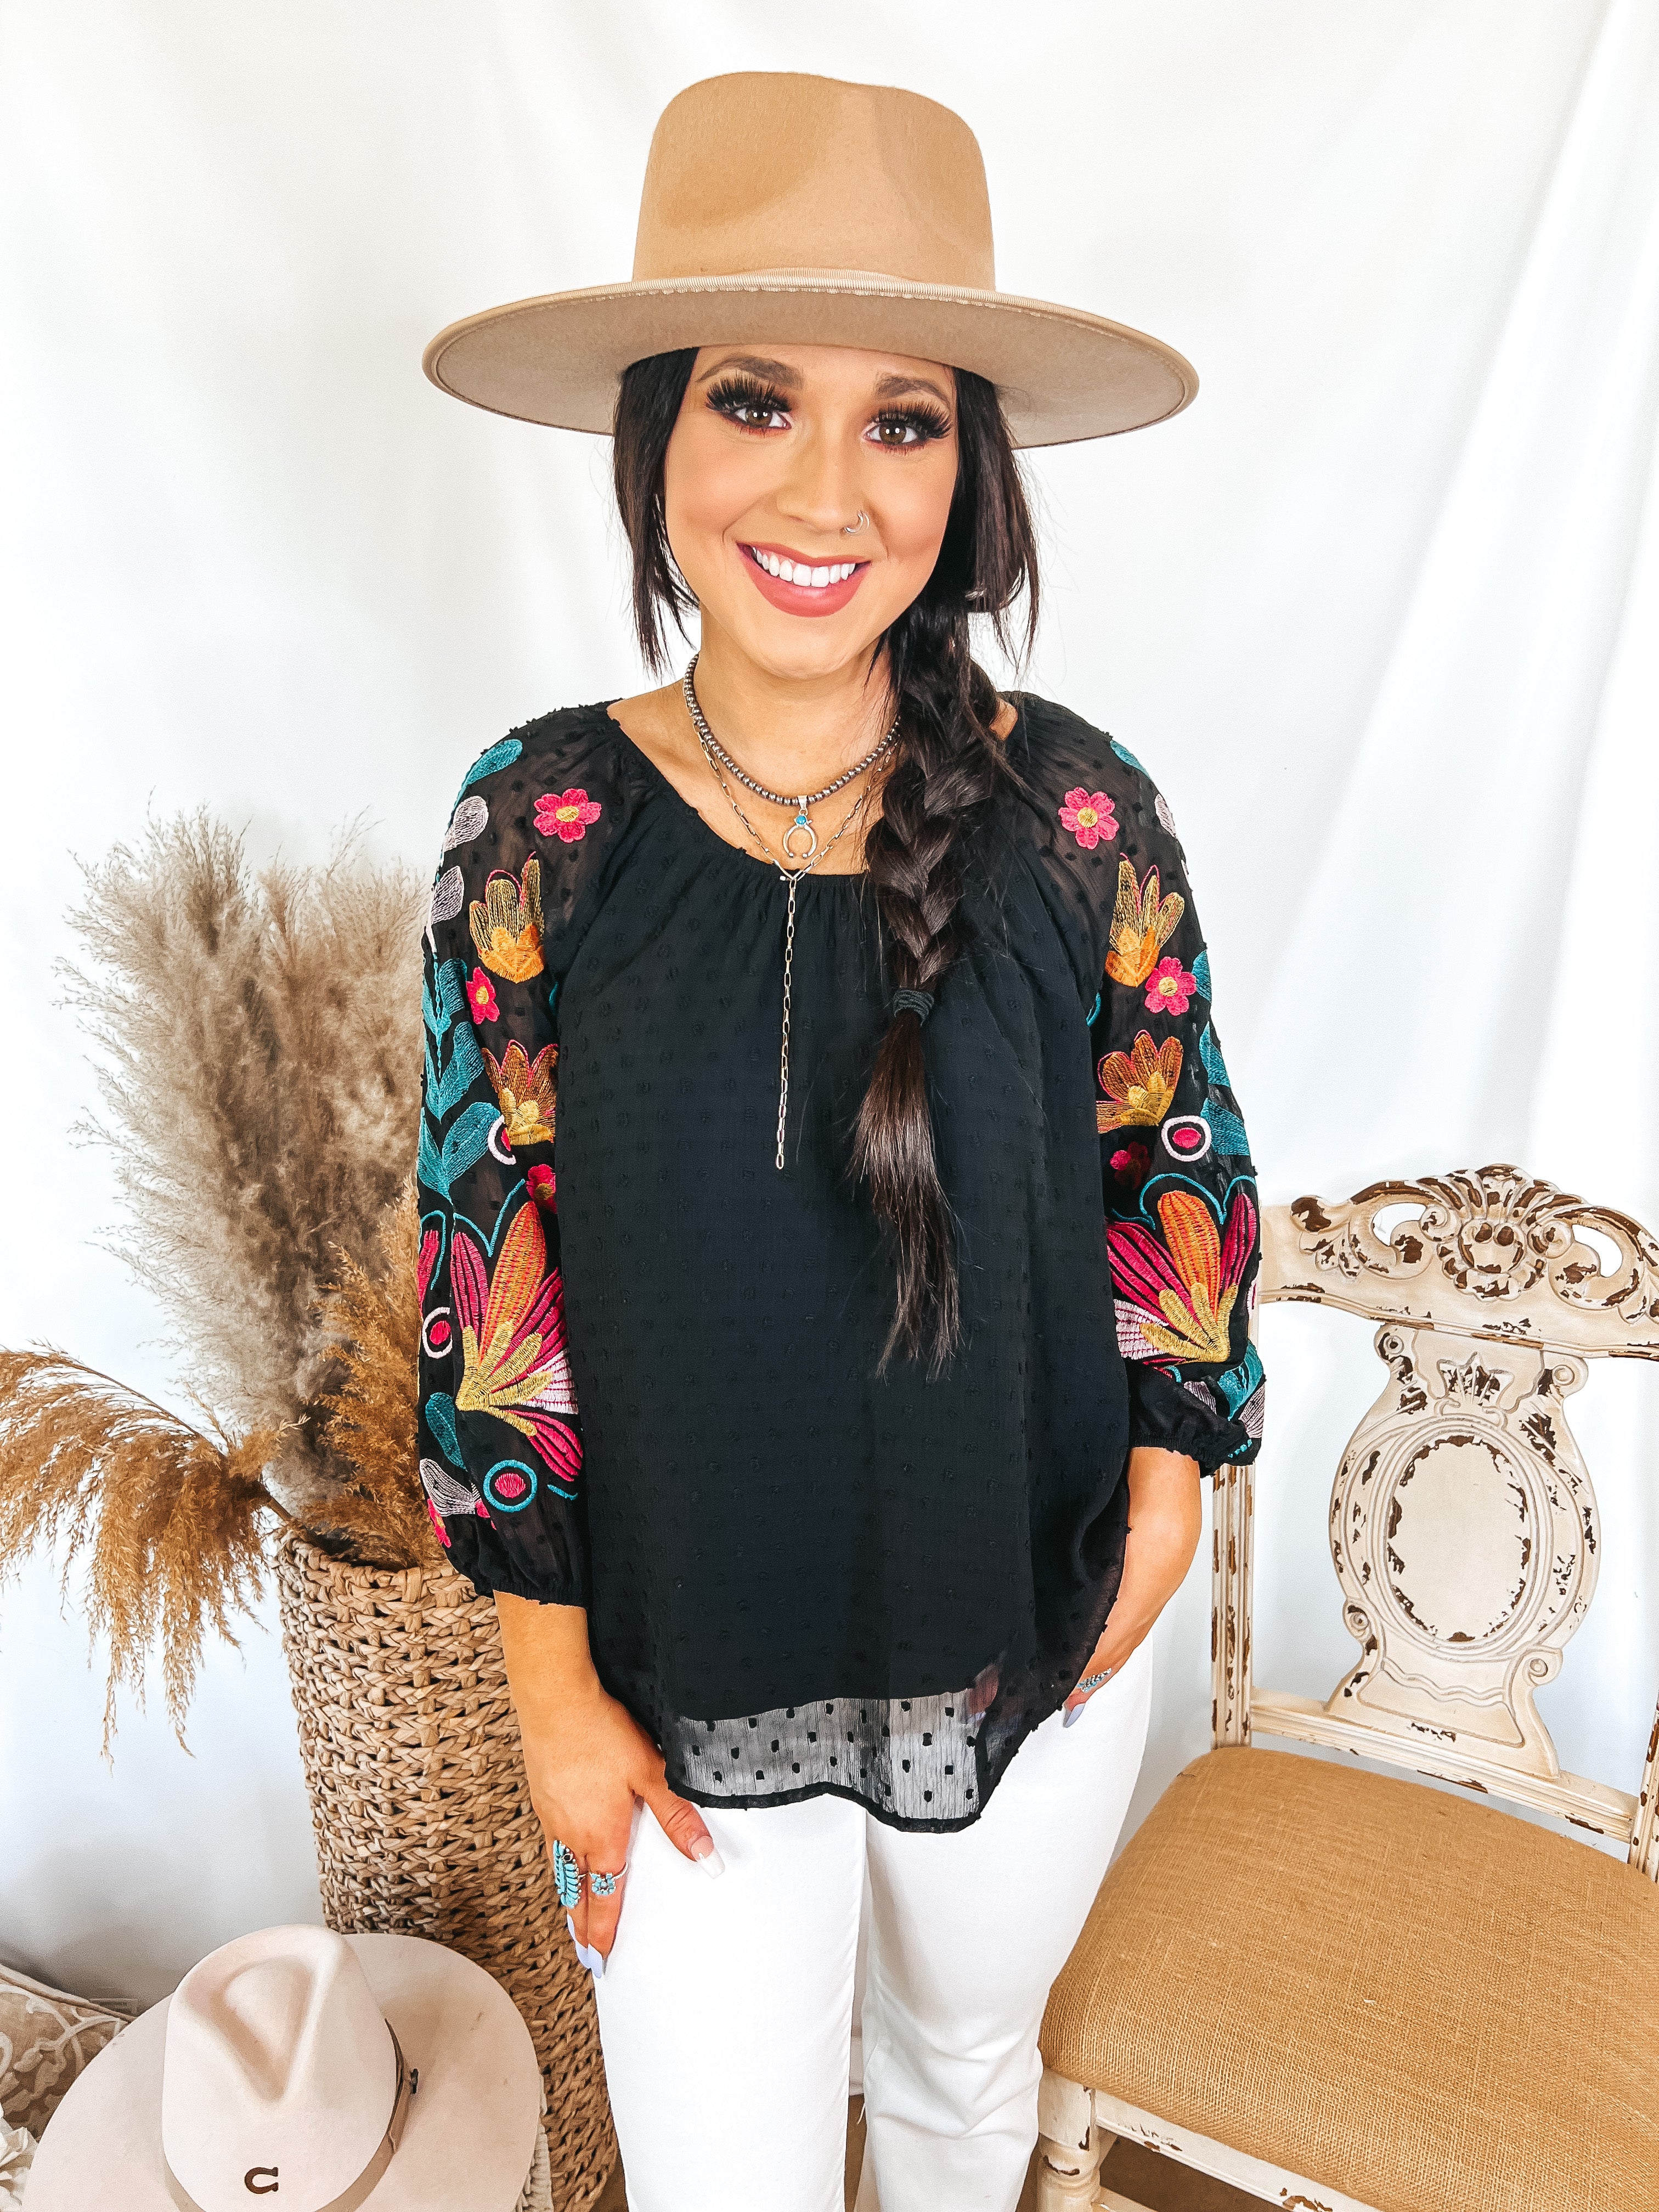 Right About You Floral Embroidered 3/4 Sleeve Top in Black - Giddy Up Glamour Boutique